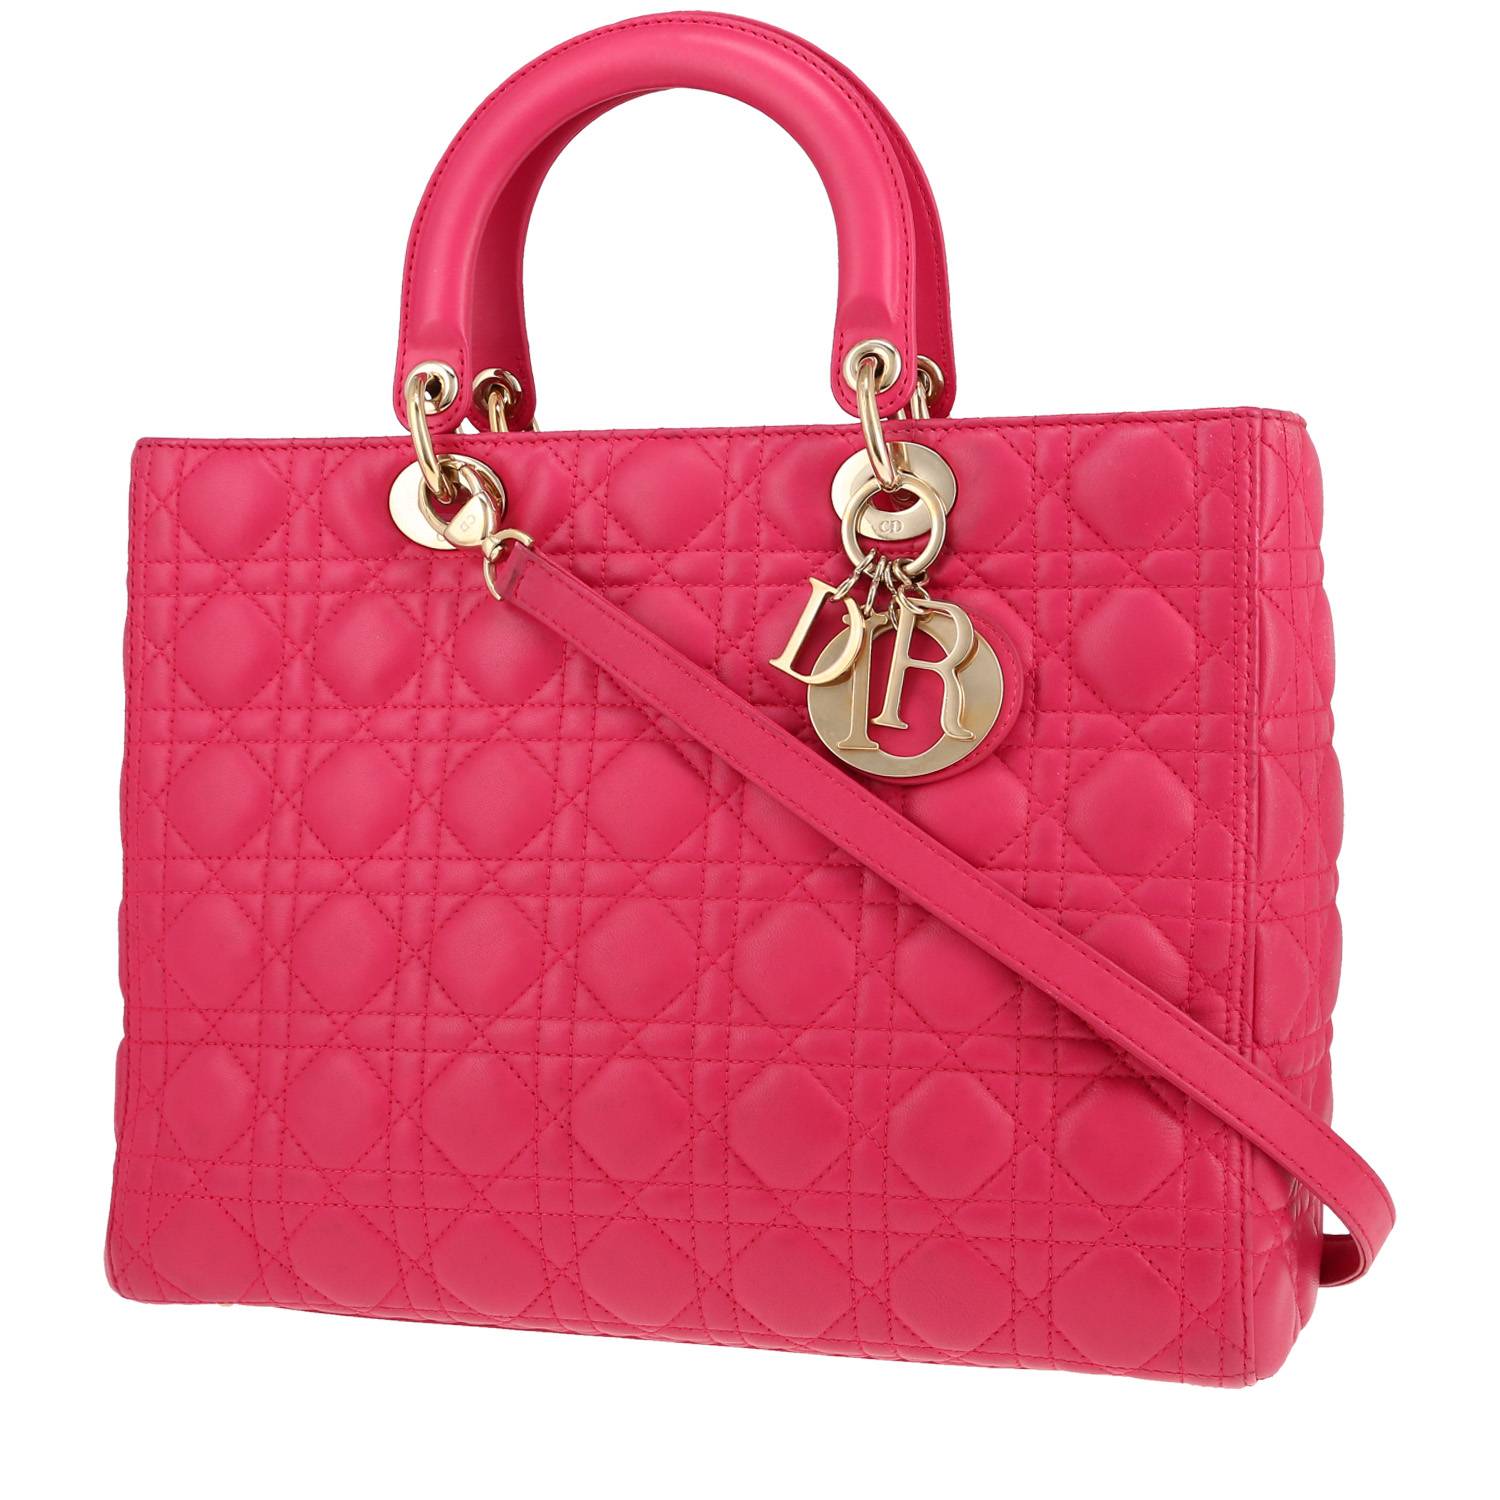 Lady Dior Large Model Handbag In Pink Leather Cannage